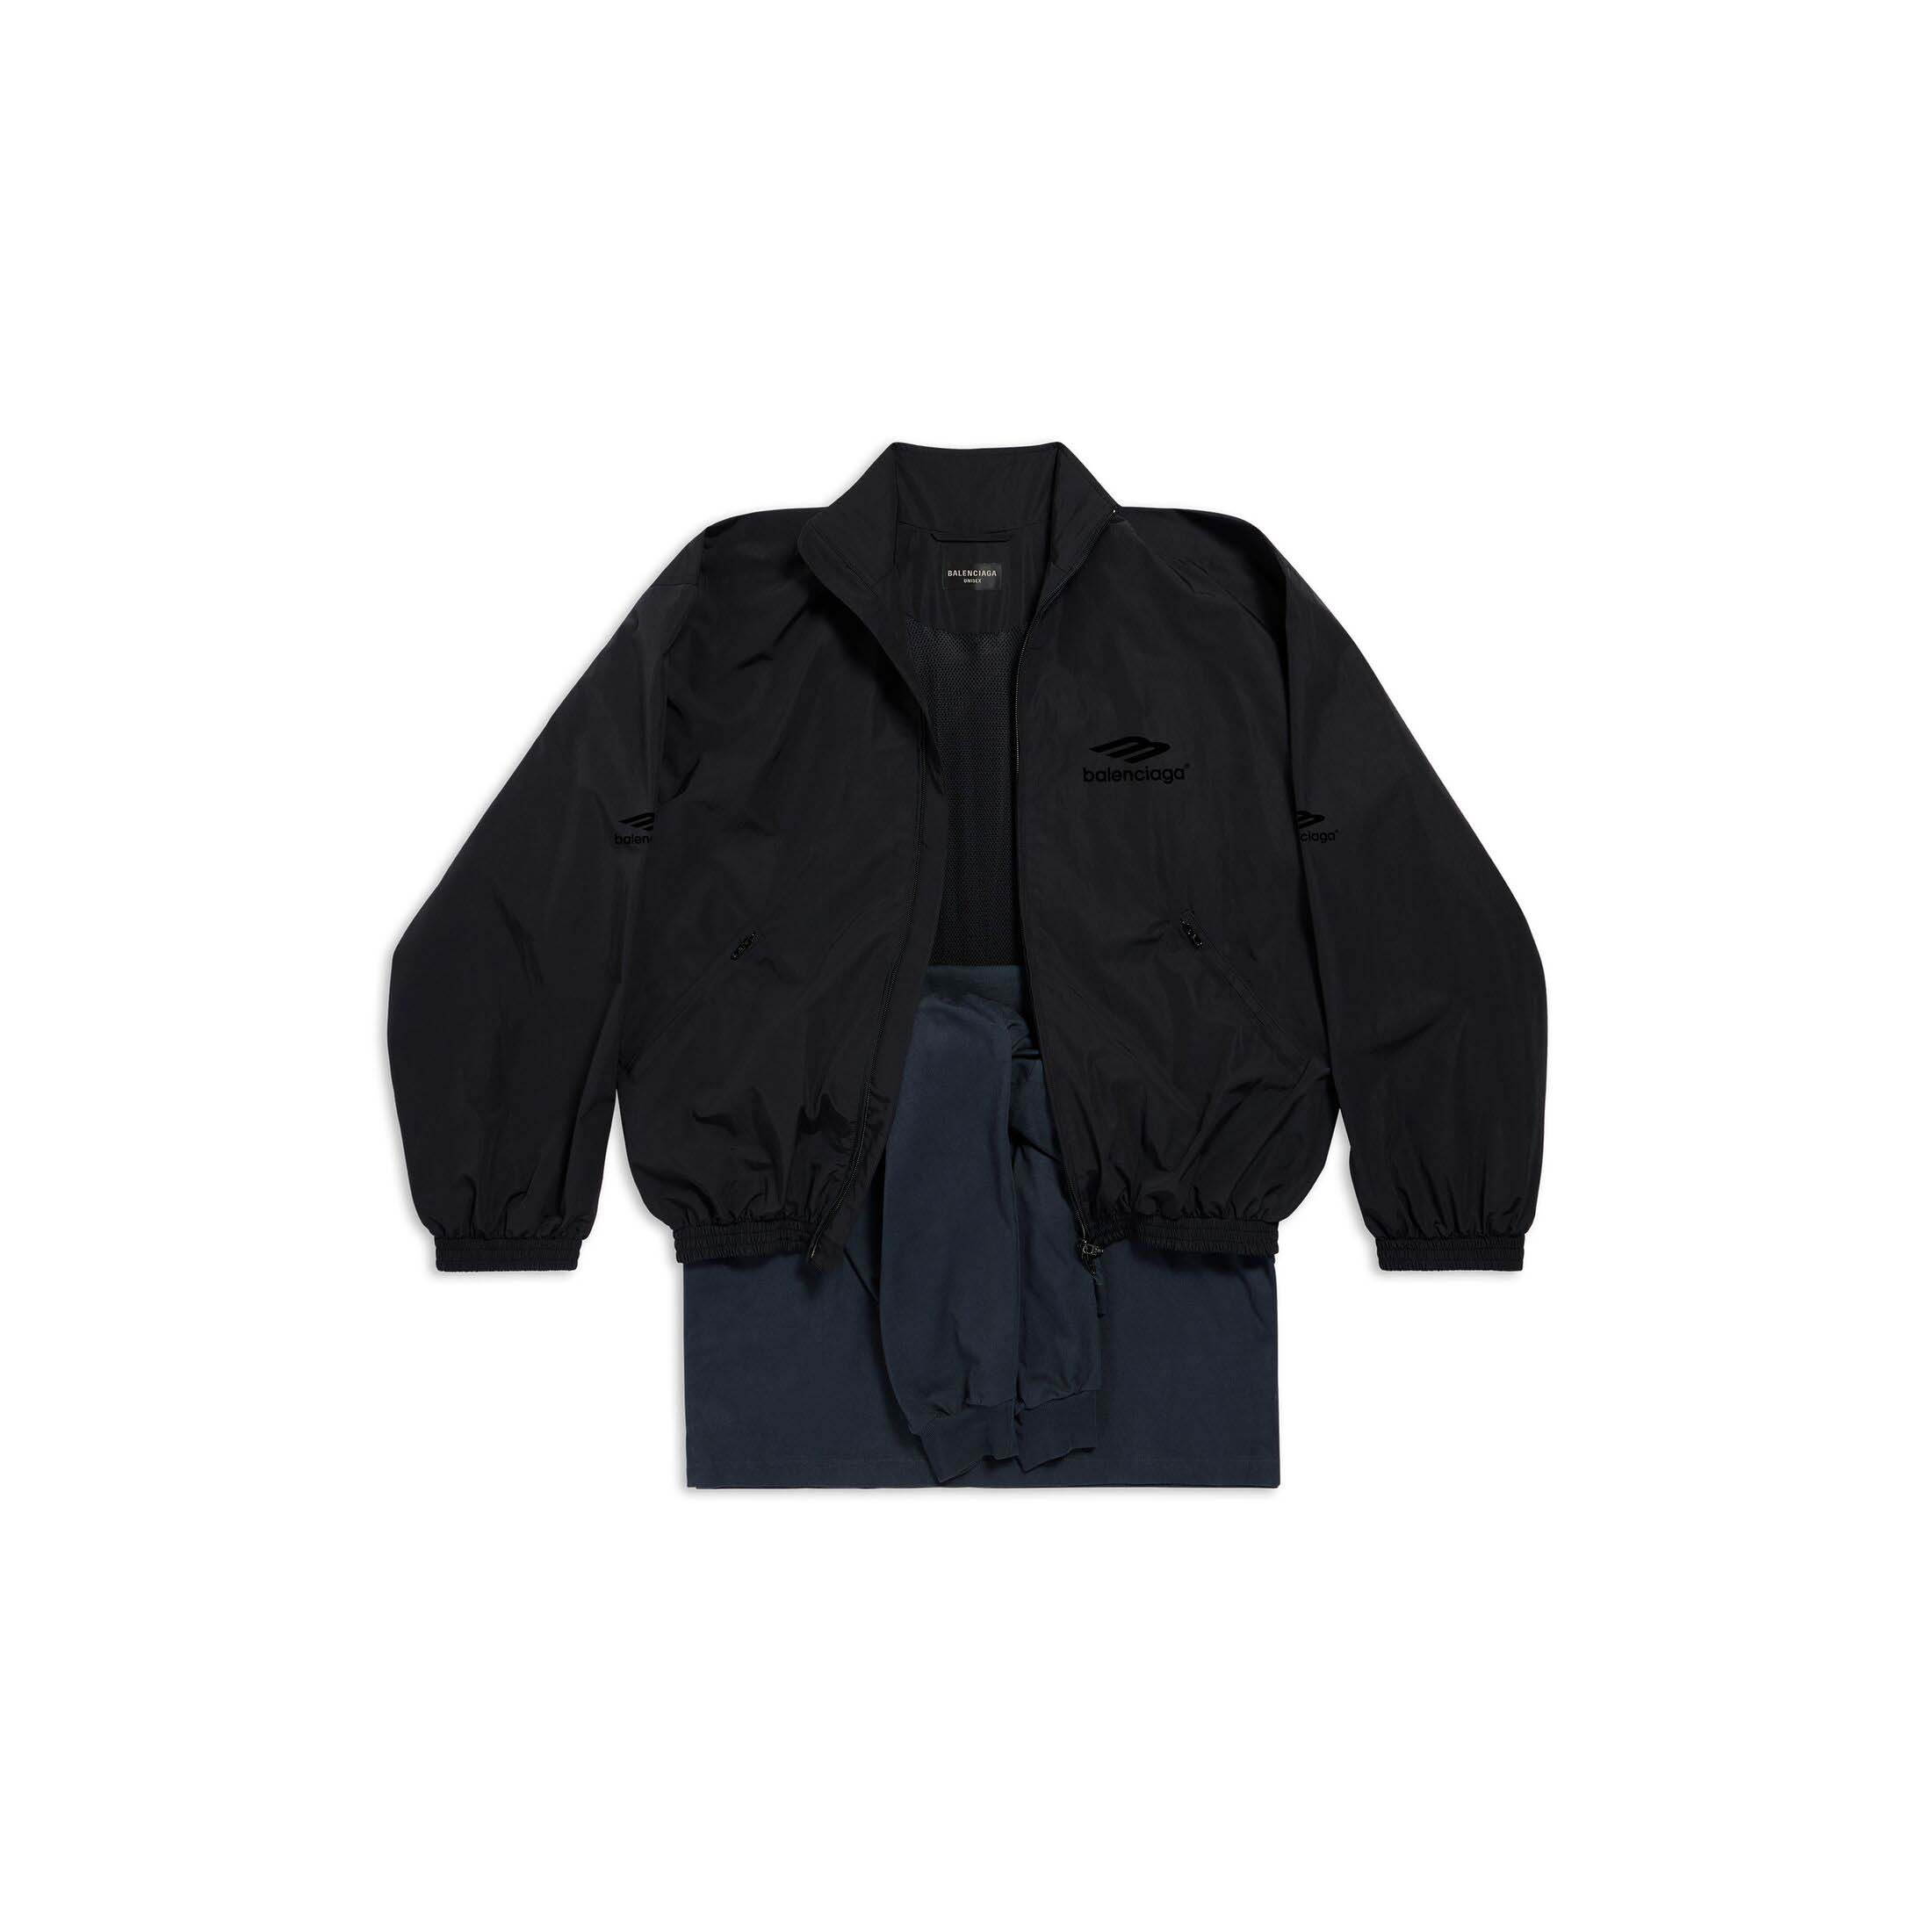 Balenciaga Patched Tracksuit Jacket in Black Black